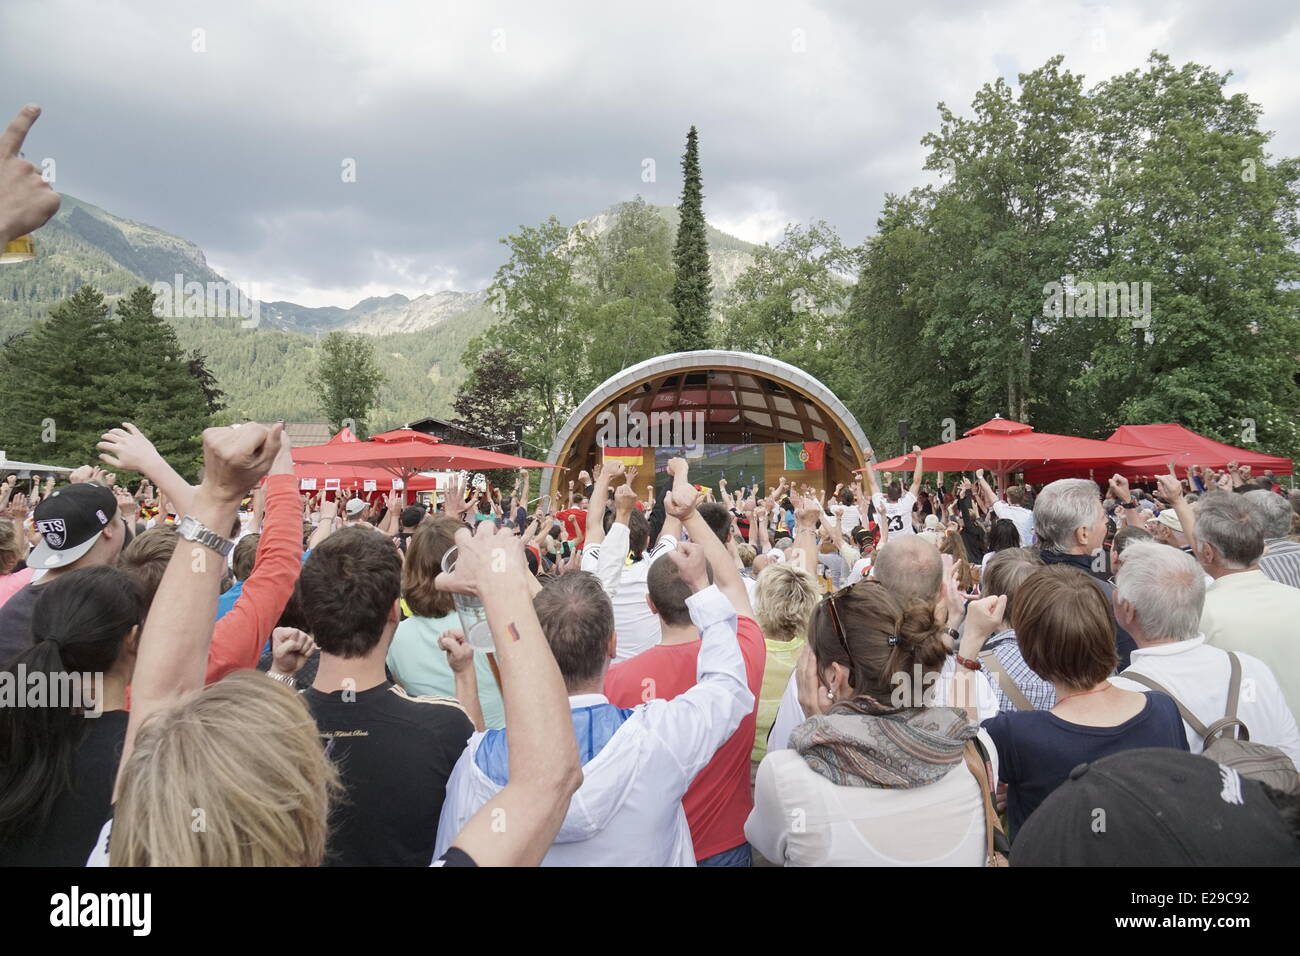 OBERSTDORF GERMANY JUNE 16: Spectators of the 2014 Soccer World cup in Brazil  celebrating the game between Germany and Portugal at the famous winter sports resort Oberstdorf with its picturesque mountains in the background Credit:  mezzotint alamy/Alamy Live News Stock Photo